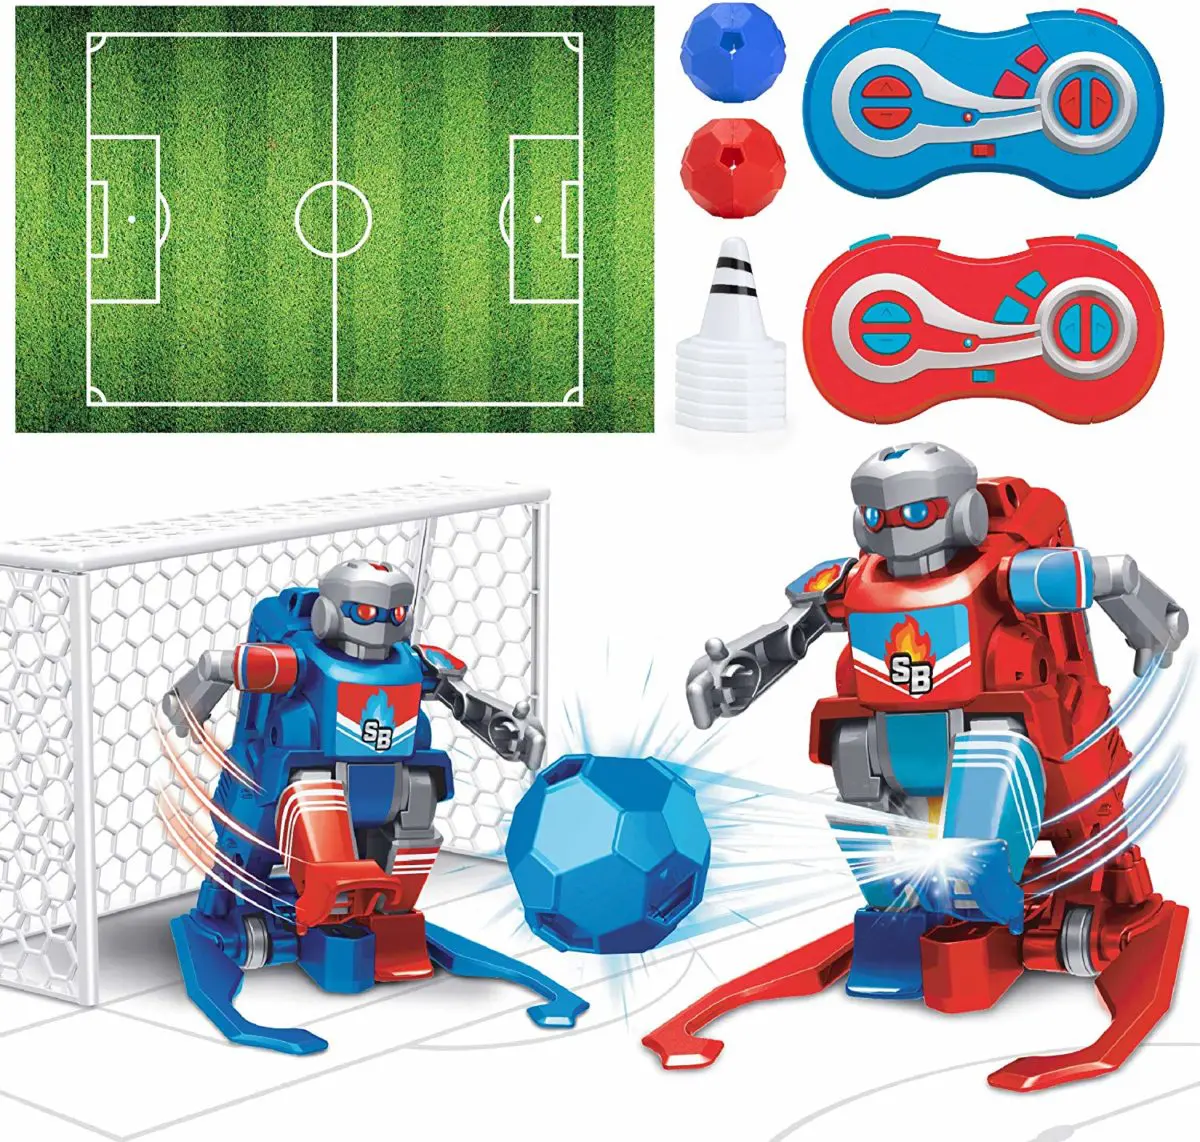 USA Toyz Soccer Bots Robot Kids Toys Remote Control Game - Top Toys and Gifts for Seven Year Old Boys 1